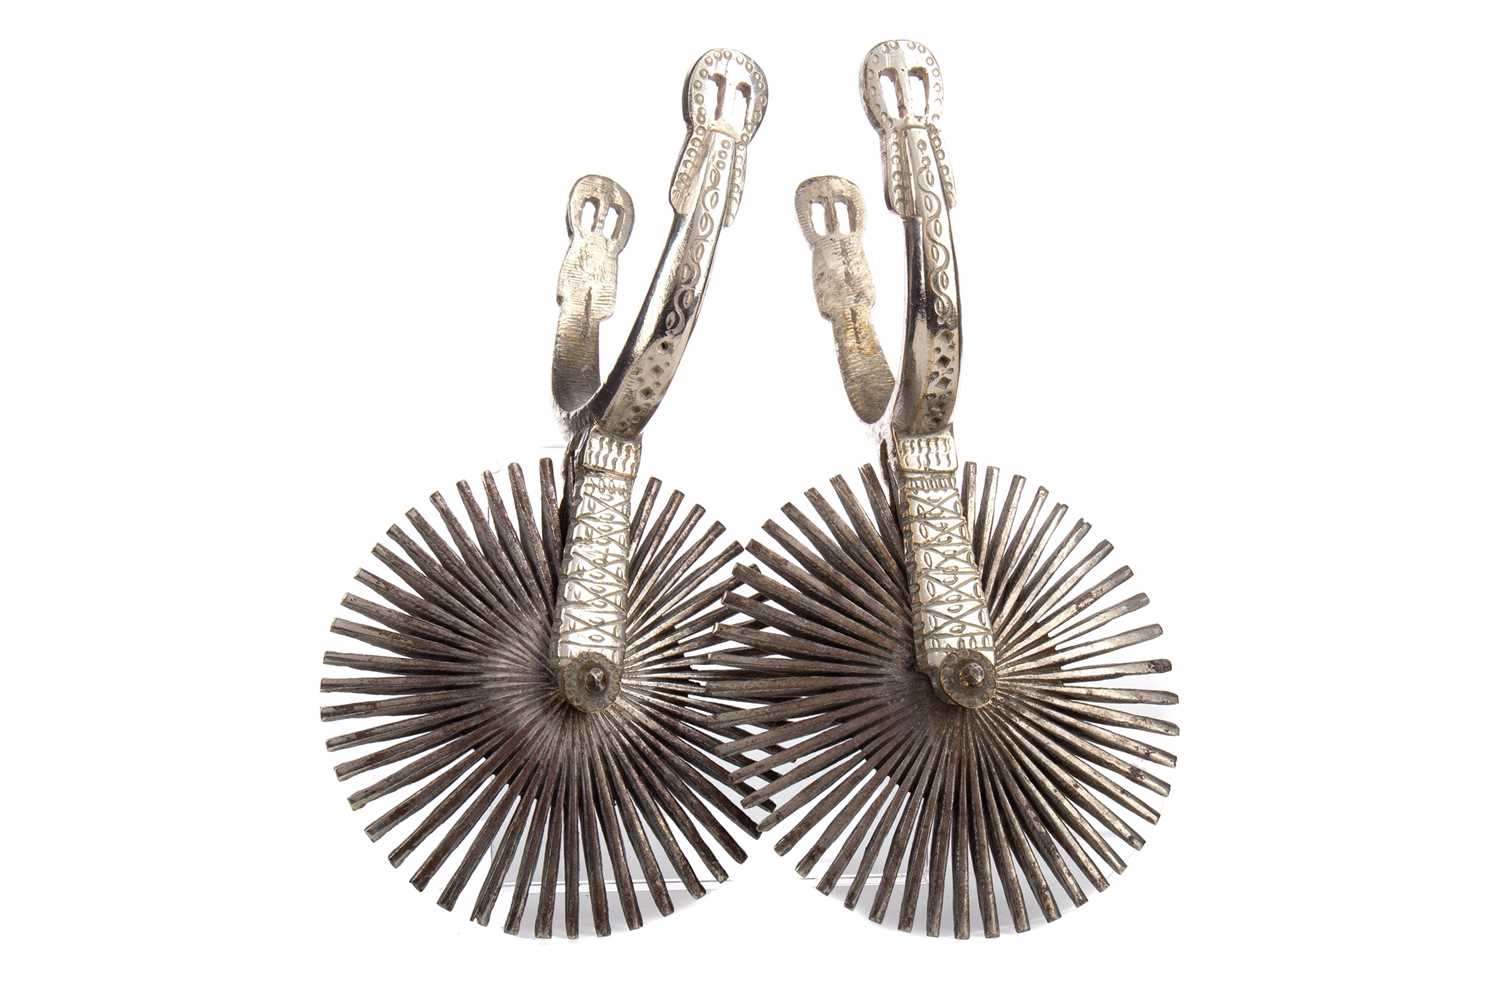 A PAIR OF MEXICAN SILVERED IRON & BRASS SPURS